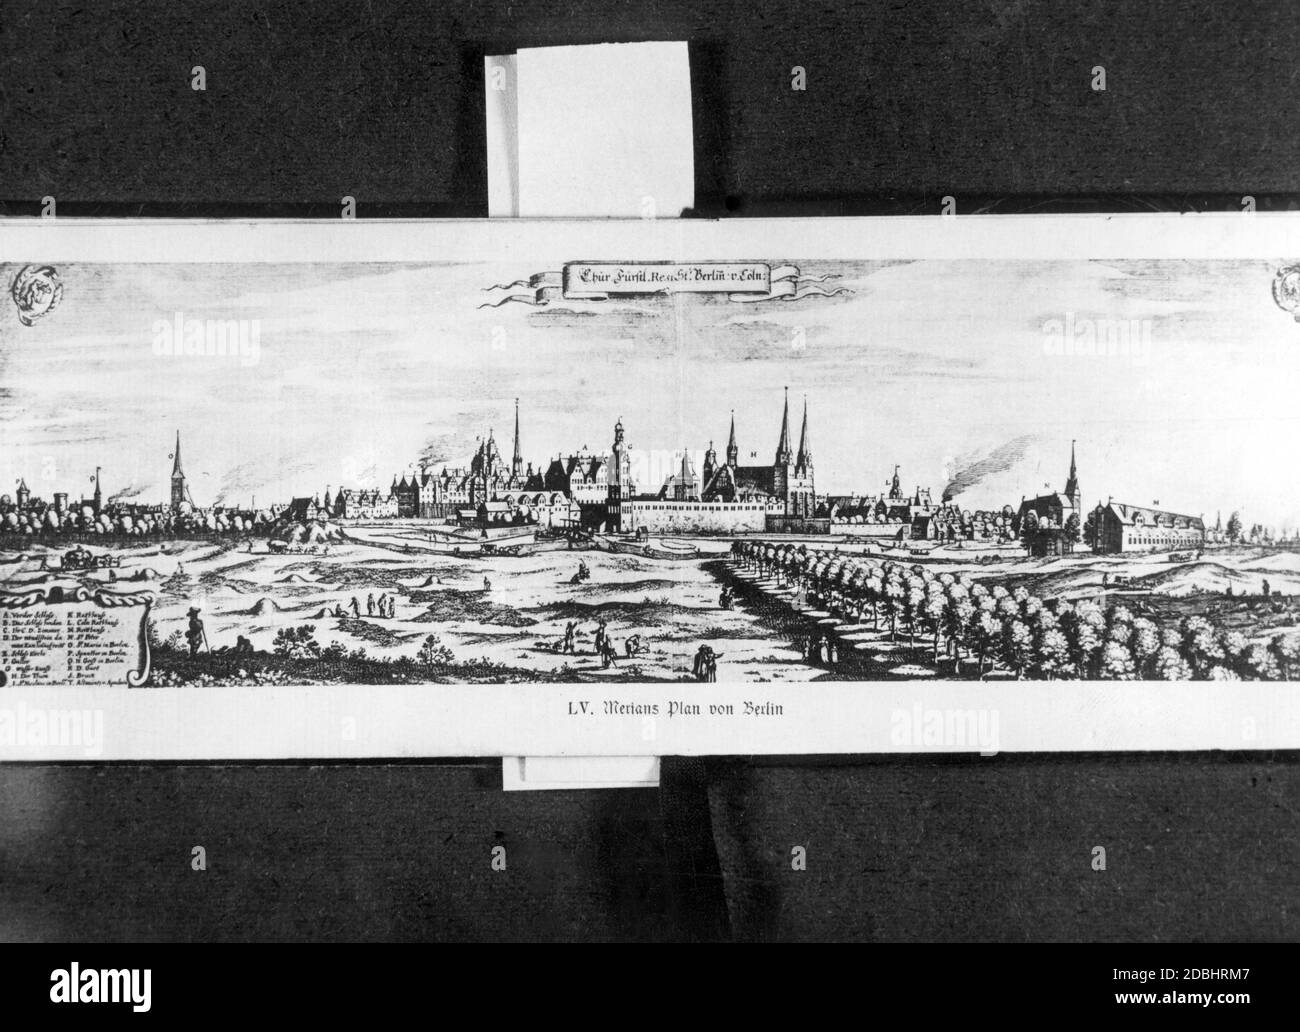 'The painting shows the cities of Berlin and Coelln (Alt-Koelln, today a part of Berlin) in 1652 according to a plan by Merian. In the foreground on the right are the beginnings of the street ''Unter den Linden'', on the left the Hundebruecke. In the background (from left): Spandauer Torturm (P), Heilige Geistkirche (Q), Marienkirche (O), Palace (A-G), Dome (H), Nikolaikirche (I), Koellnisches Rathaus (L), Petrikirche (N) and Reithaus or ''Langer Stall'' (M).' Stock Photo